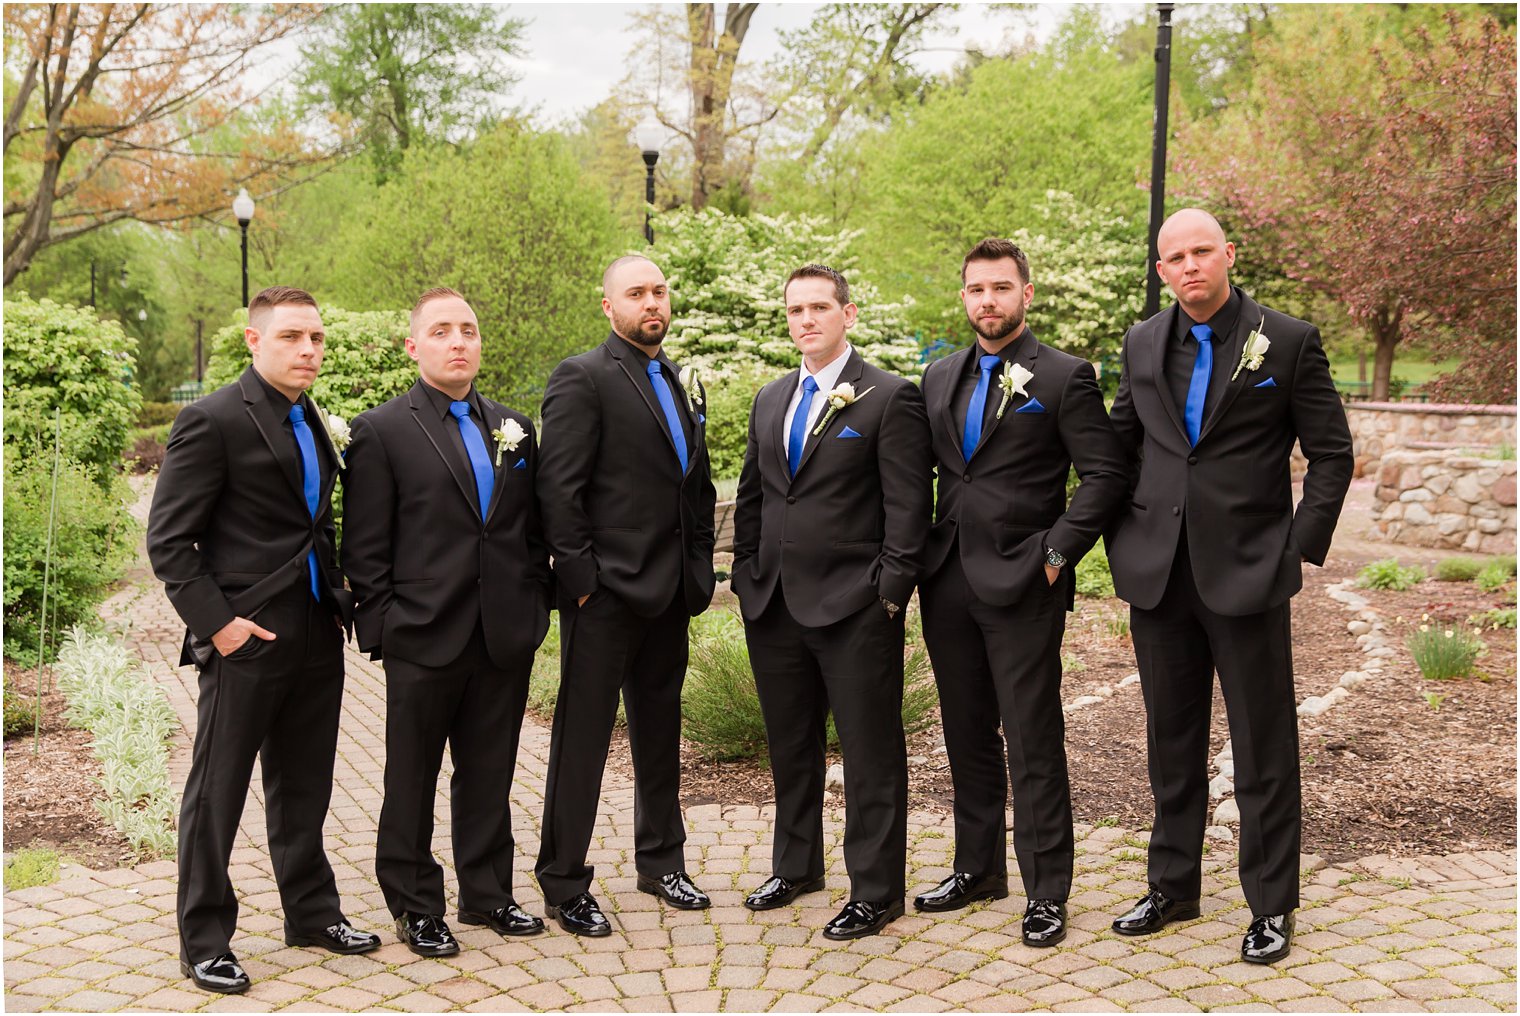 Groomsmen in black and blue suits from Men's Wearhouse